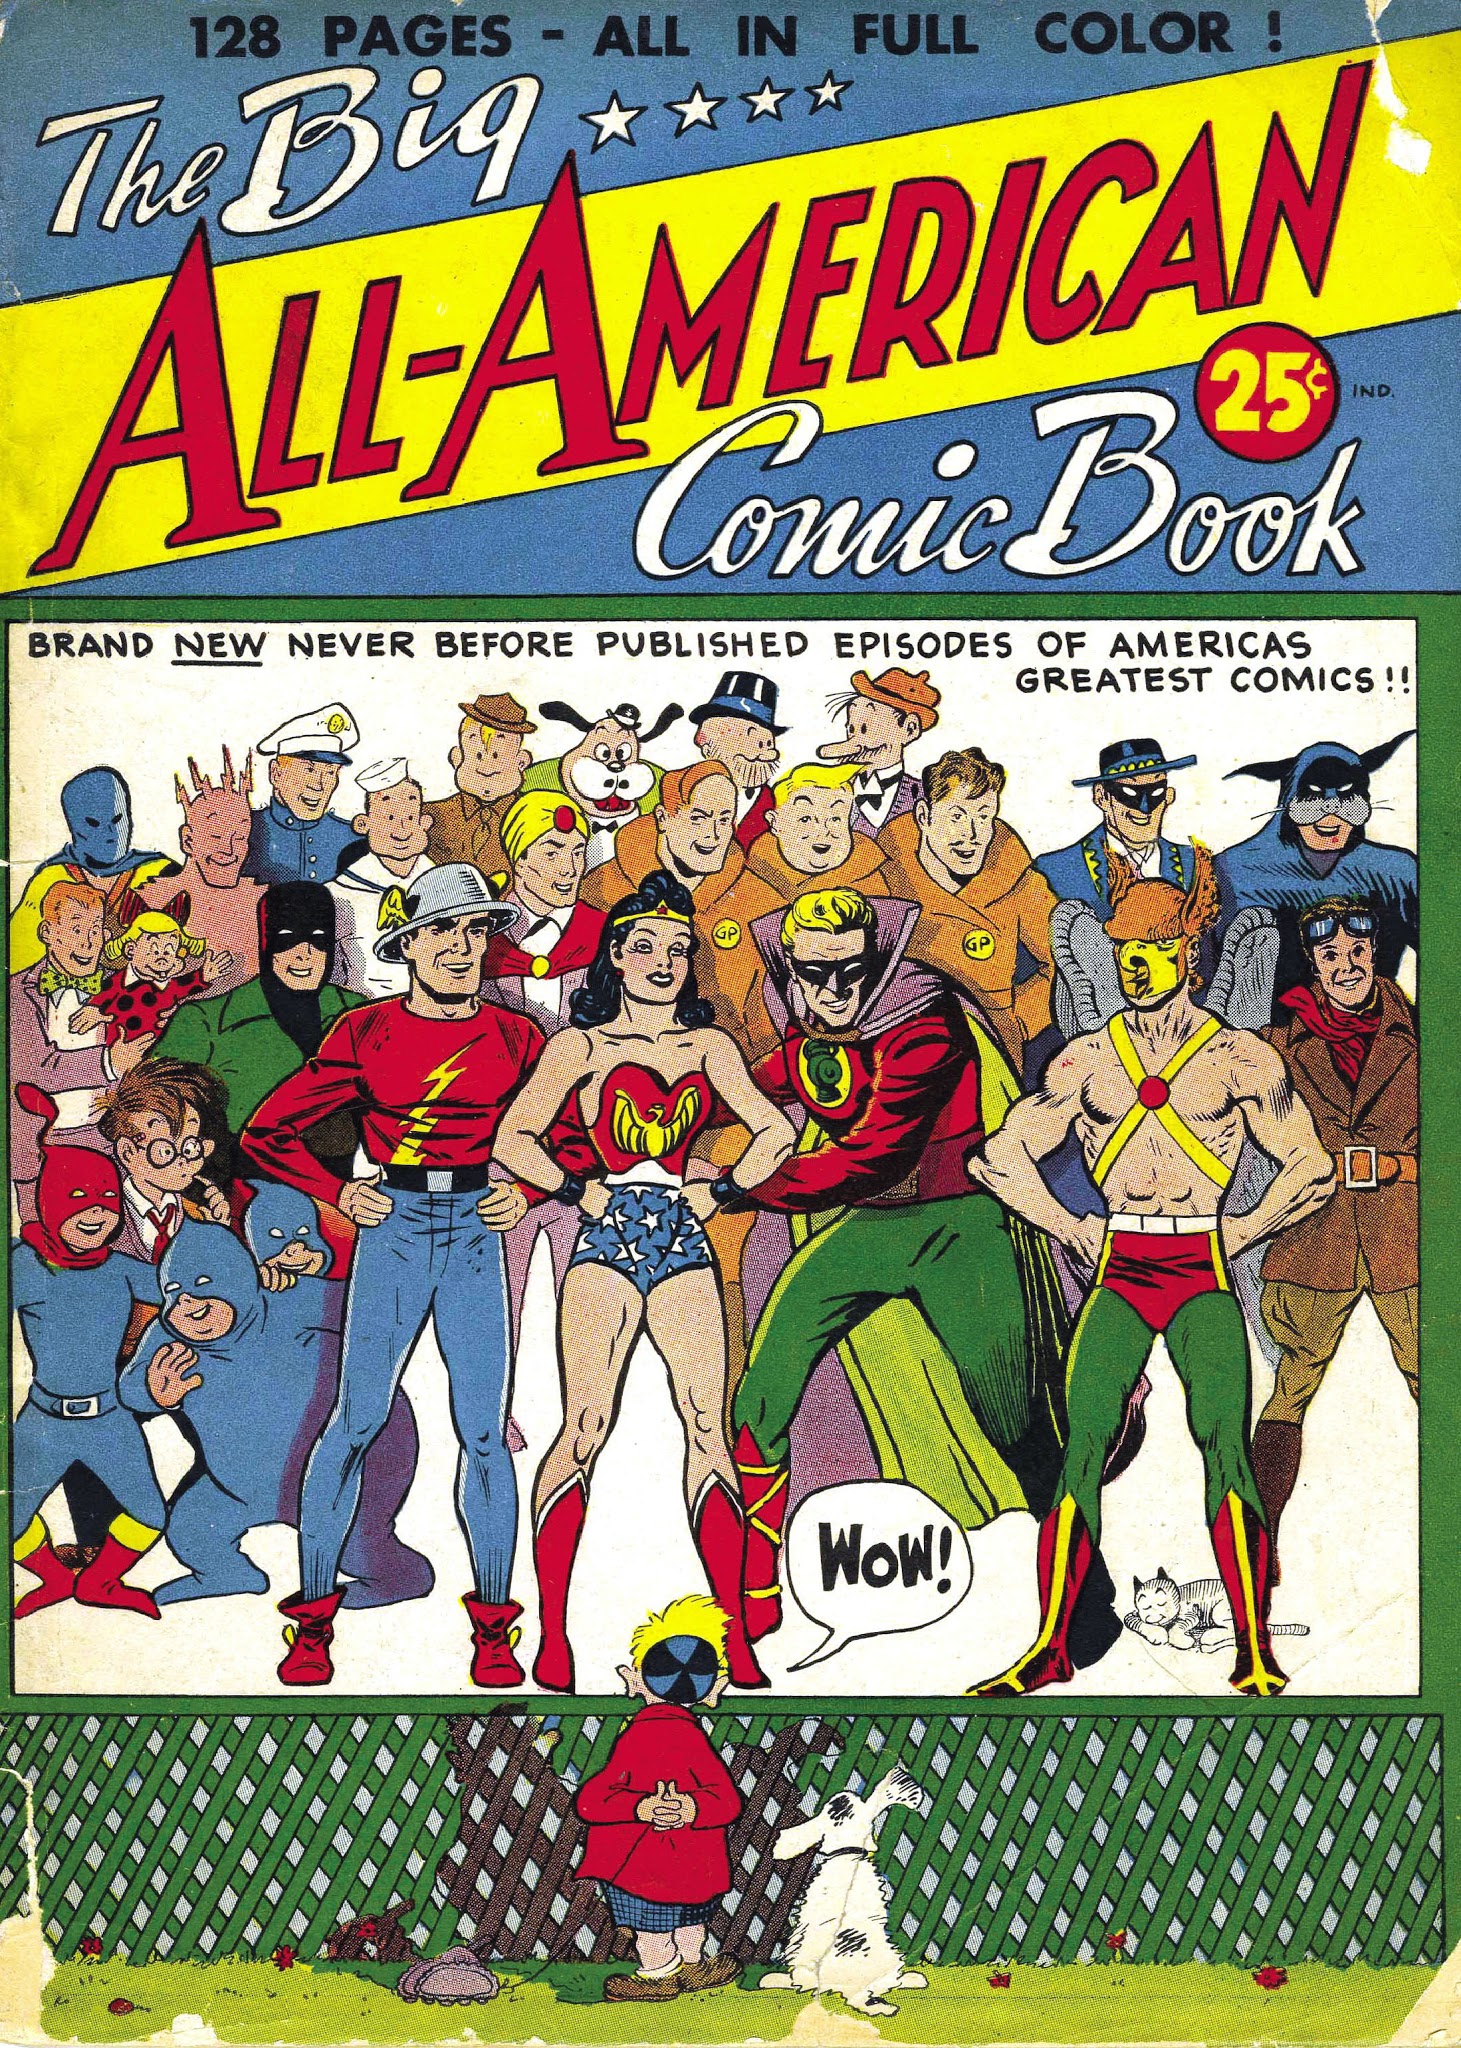 Read online The Big All-American Comic Book comic -  Issue # Full - 1